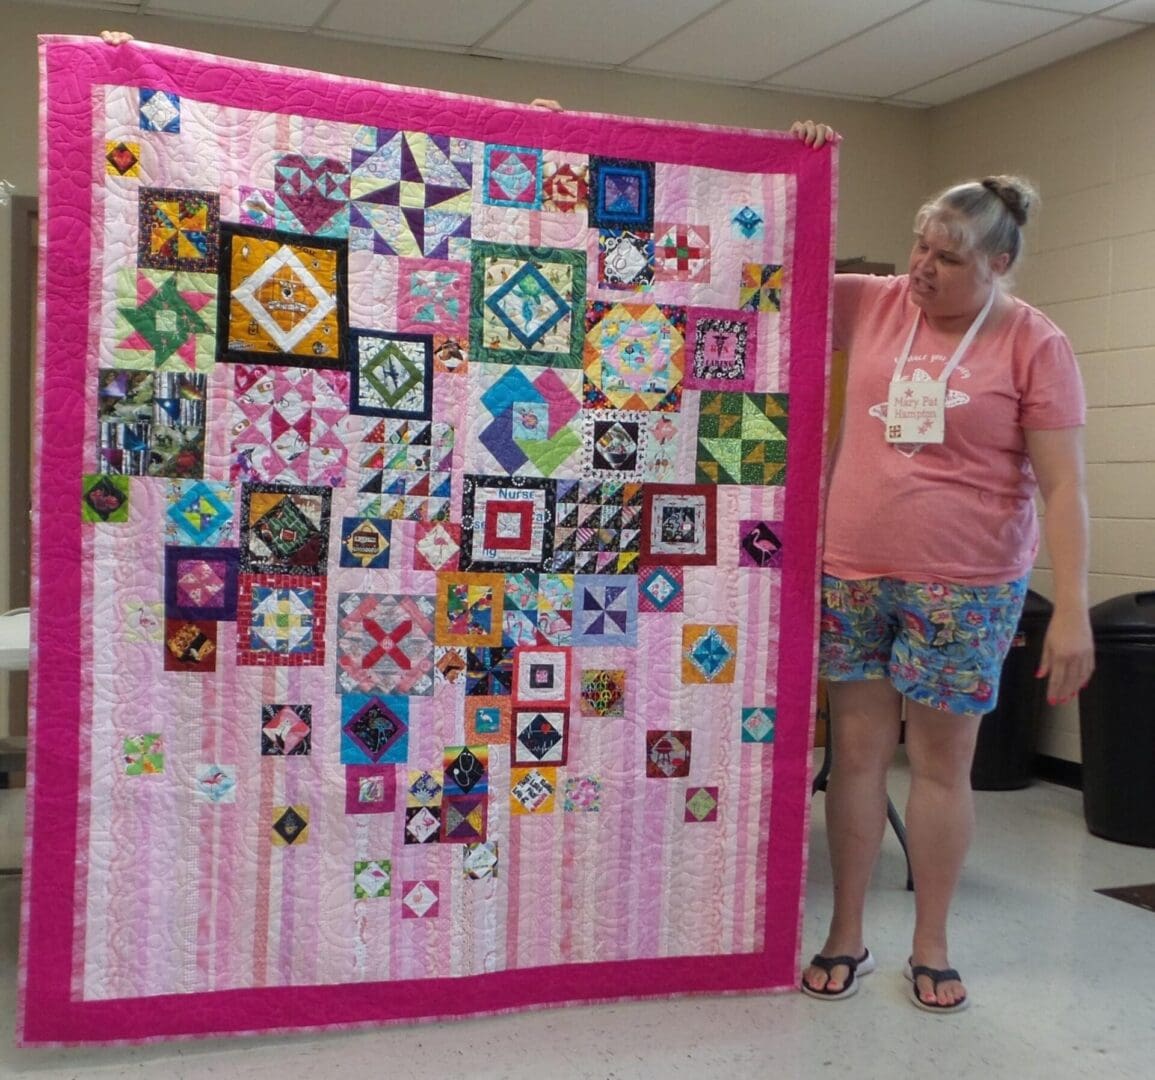 a woman looking at a pink mat with quilt work